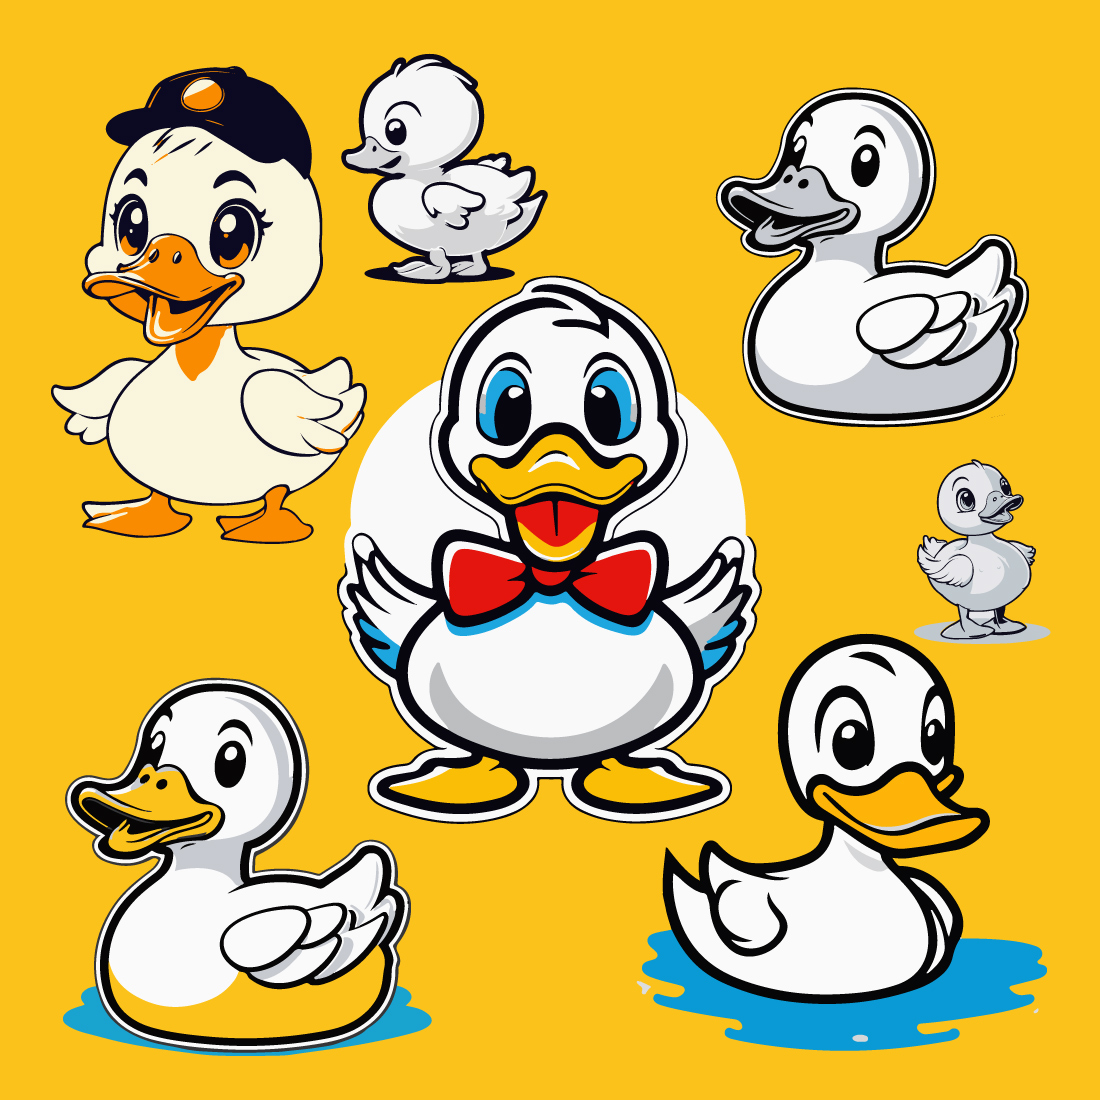 Cute adorable duck sticker and t-shirt design preview image.